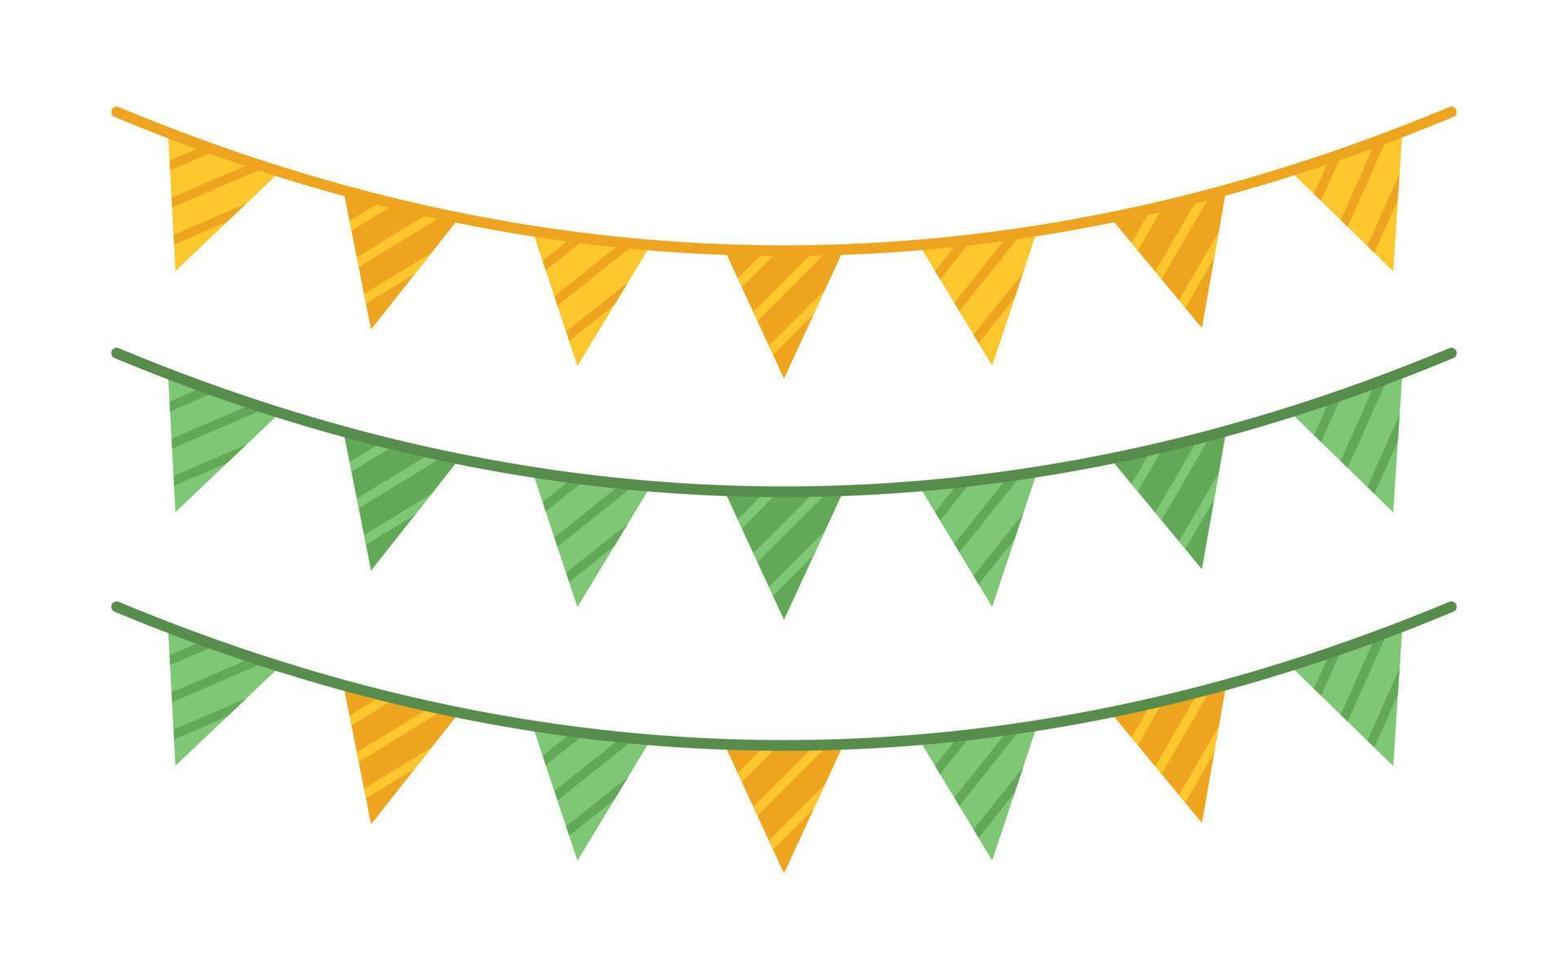 Vector St Patricks day set with green and yellow bunting. Collection for celebrating St Patricks day. Striped triangular flag garlands in flat design.